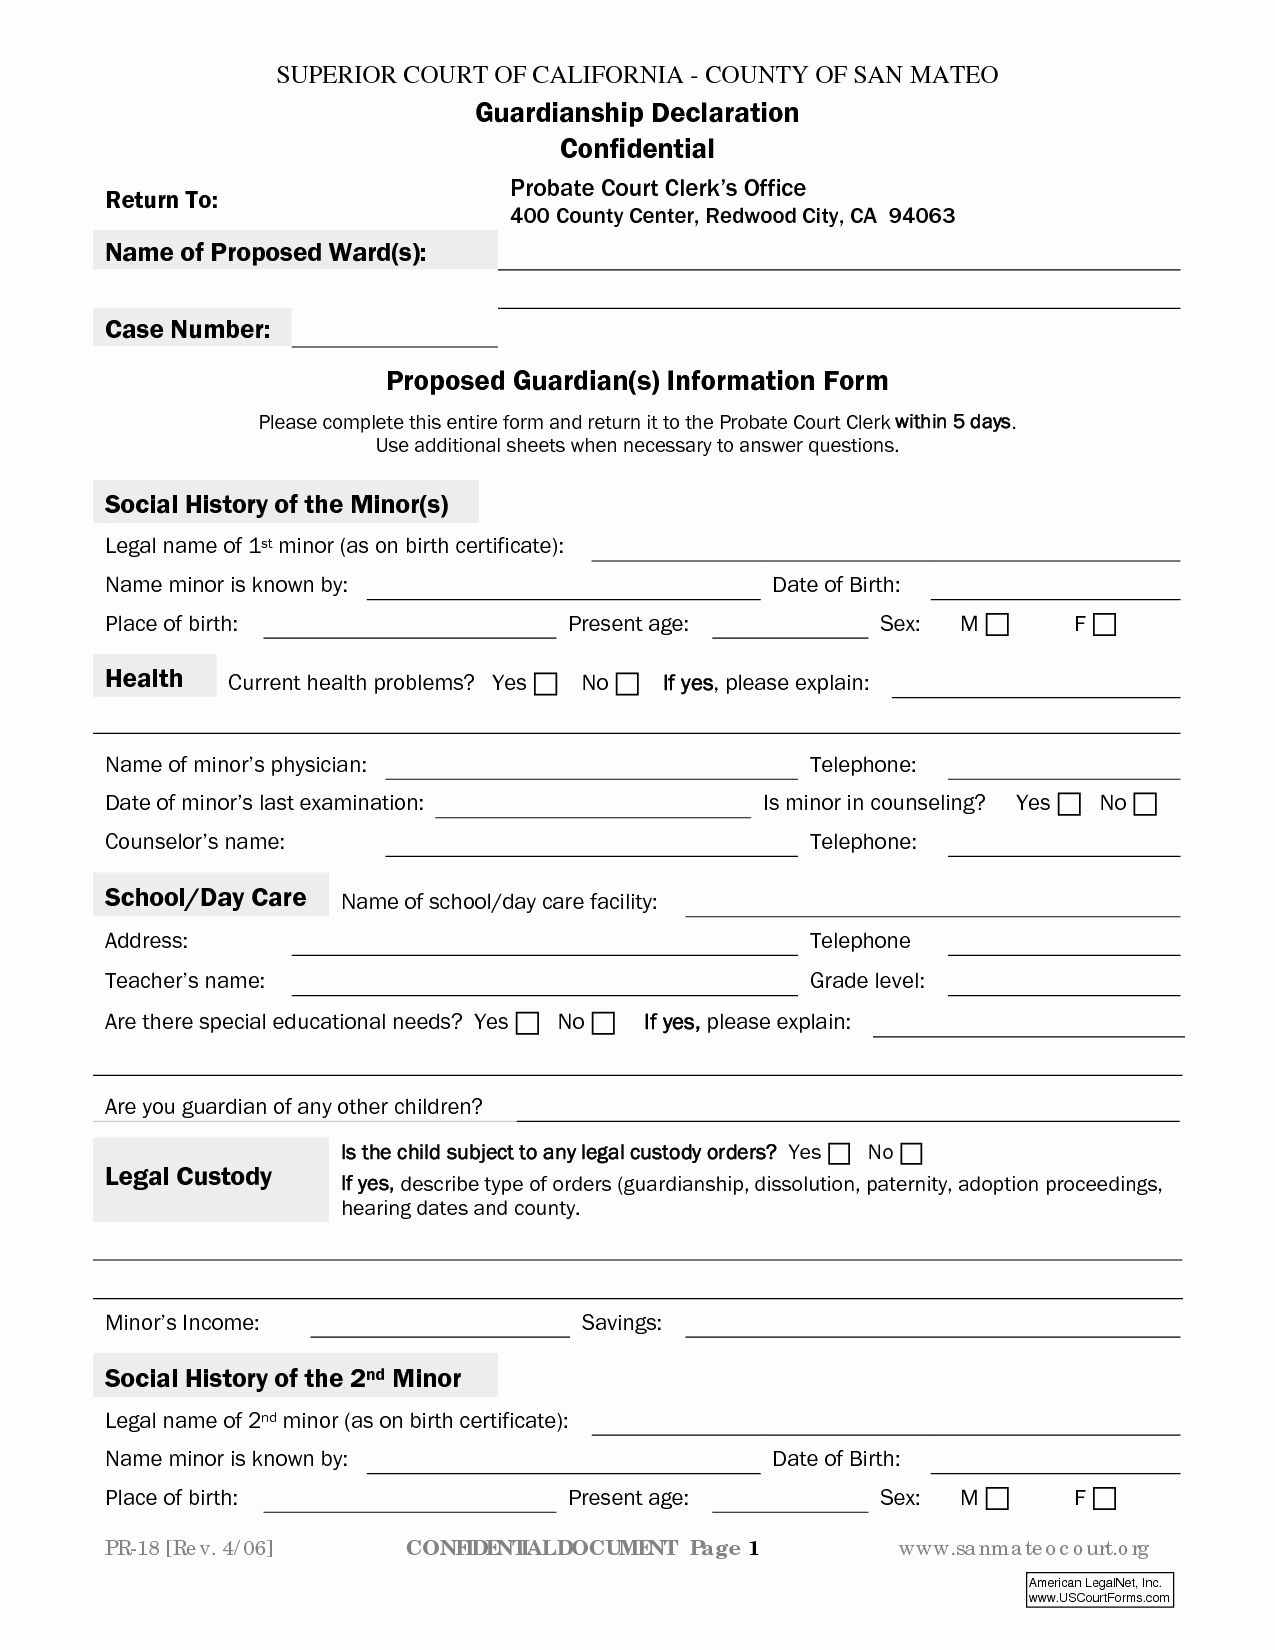 Temporary Guardianship Agreement form Lovely Temporary Guardianship Agreement form California Detail